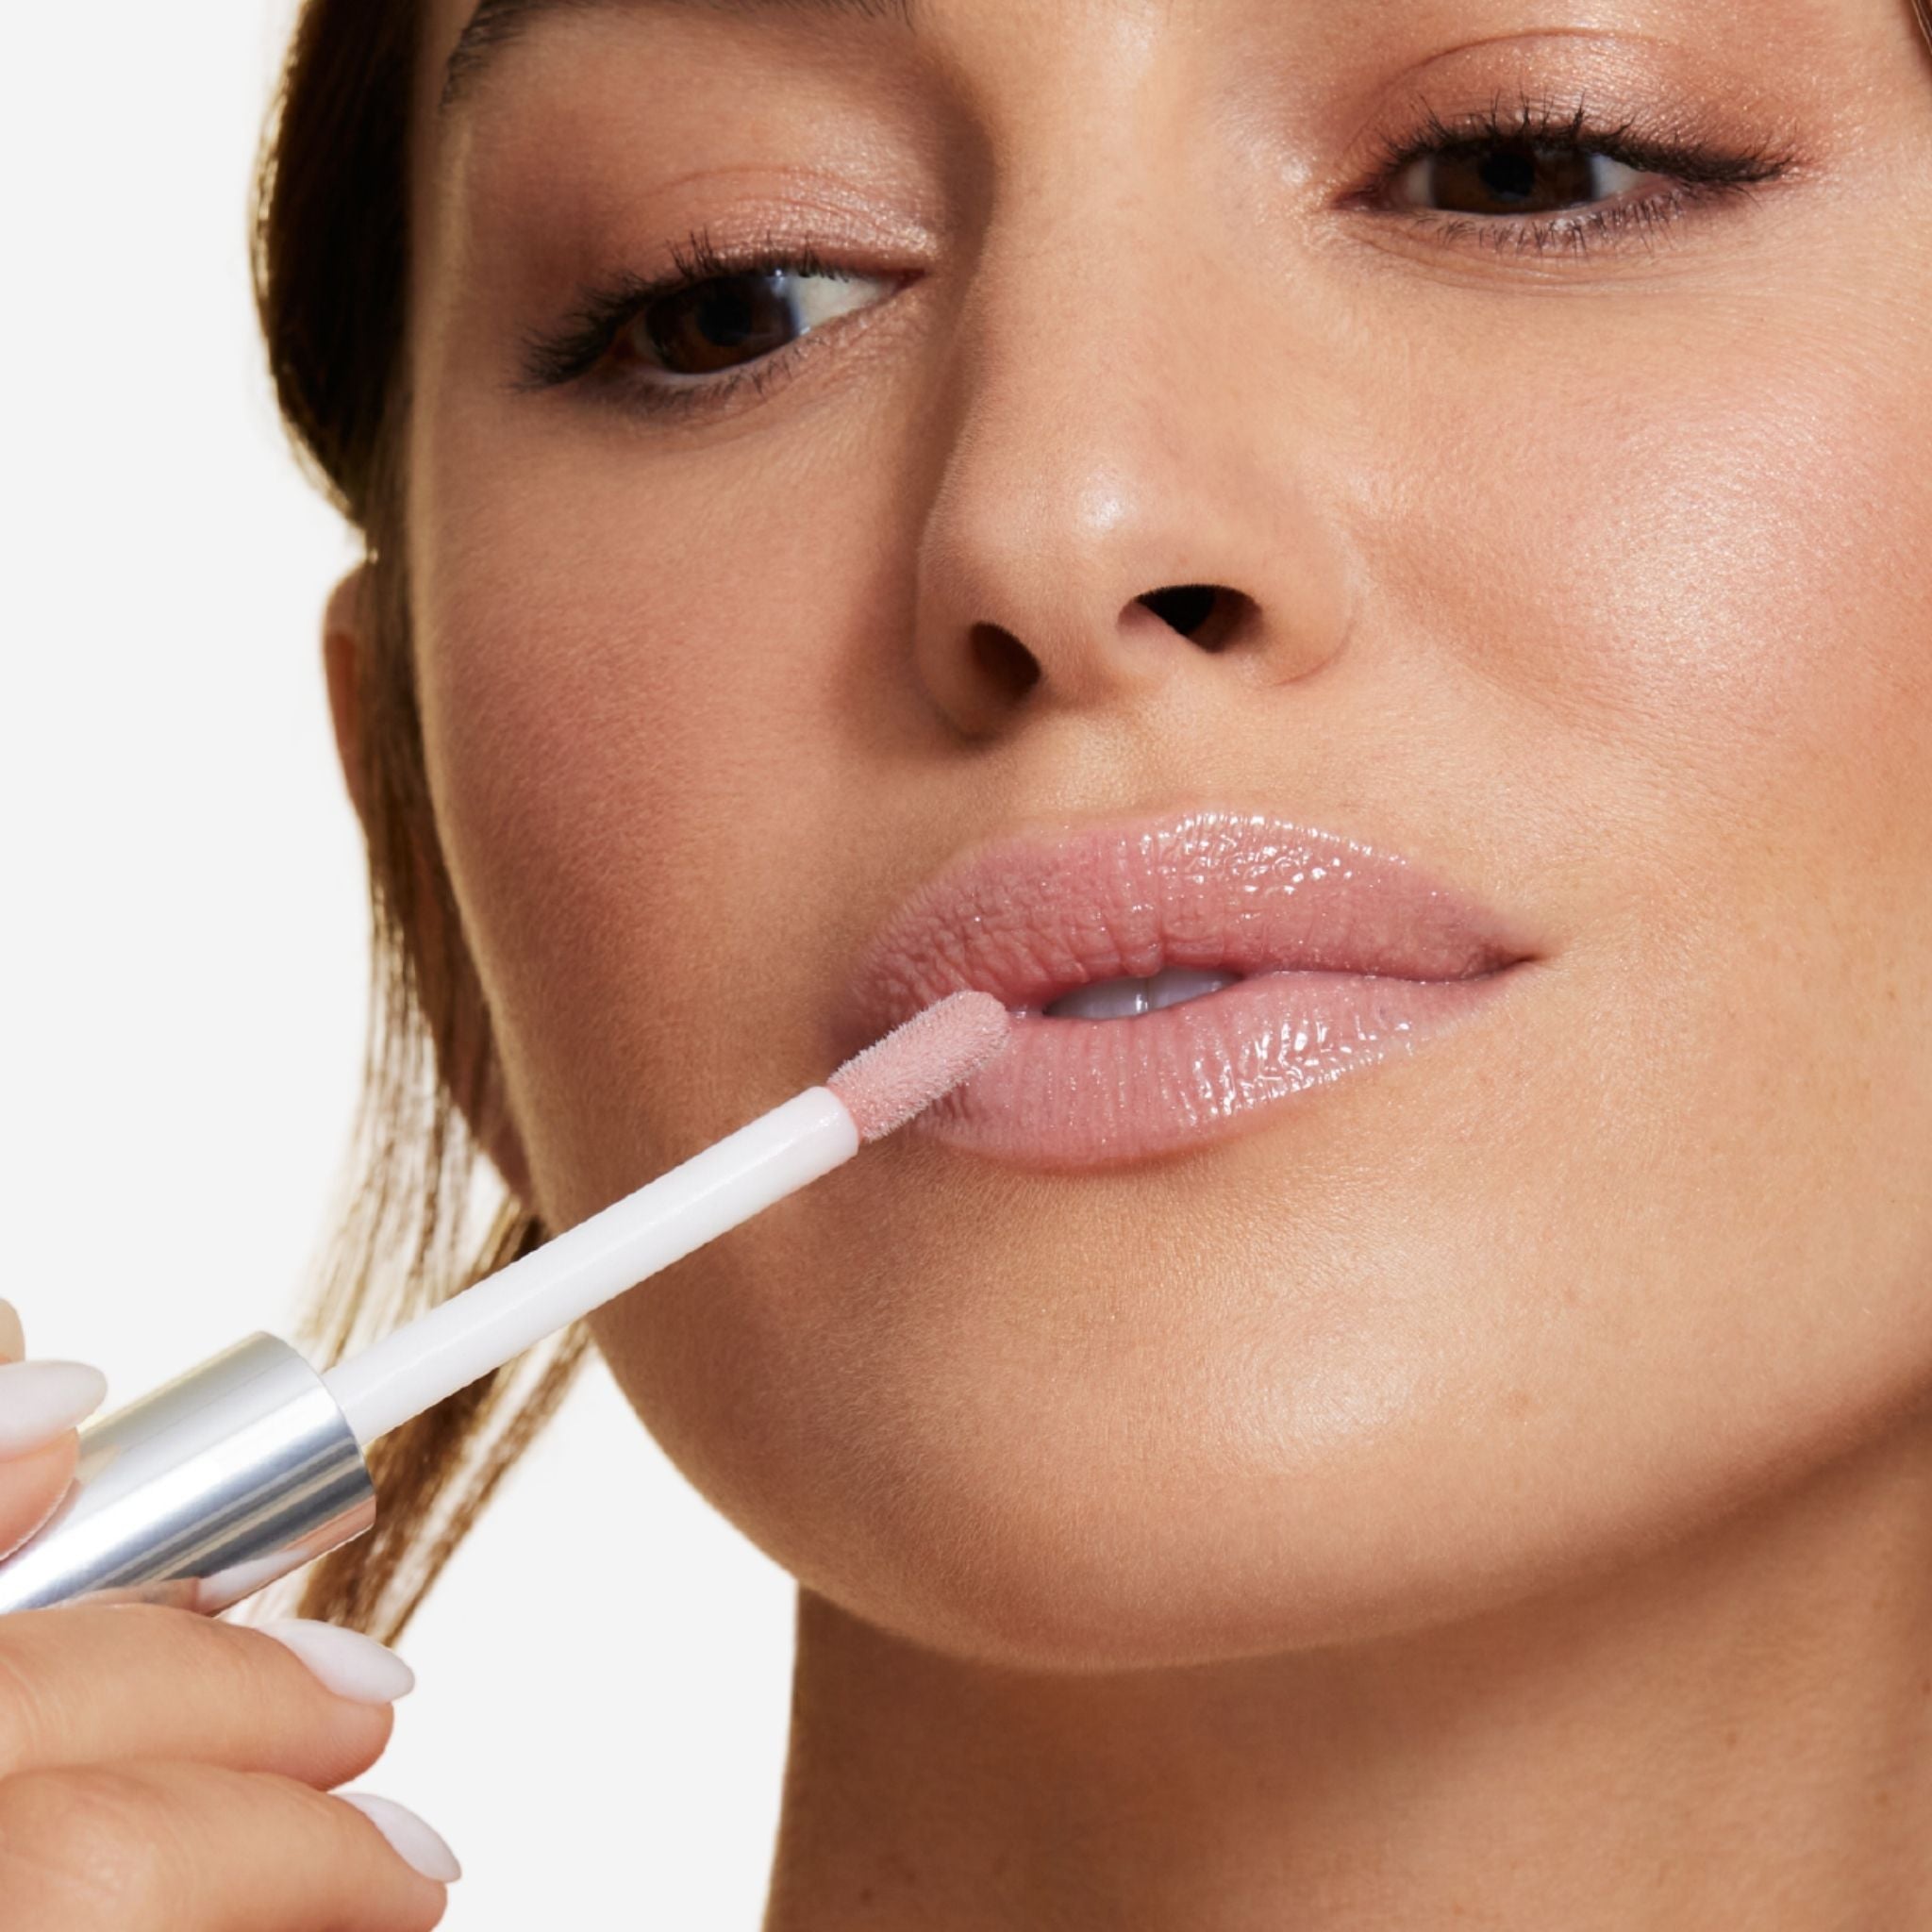 Previously known as beige frosted, our favorite lip gloss has been renamed to veil. Now infused with shea butter AND hyaluronic acid. Photo of model applying gorgeous nude color to lips